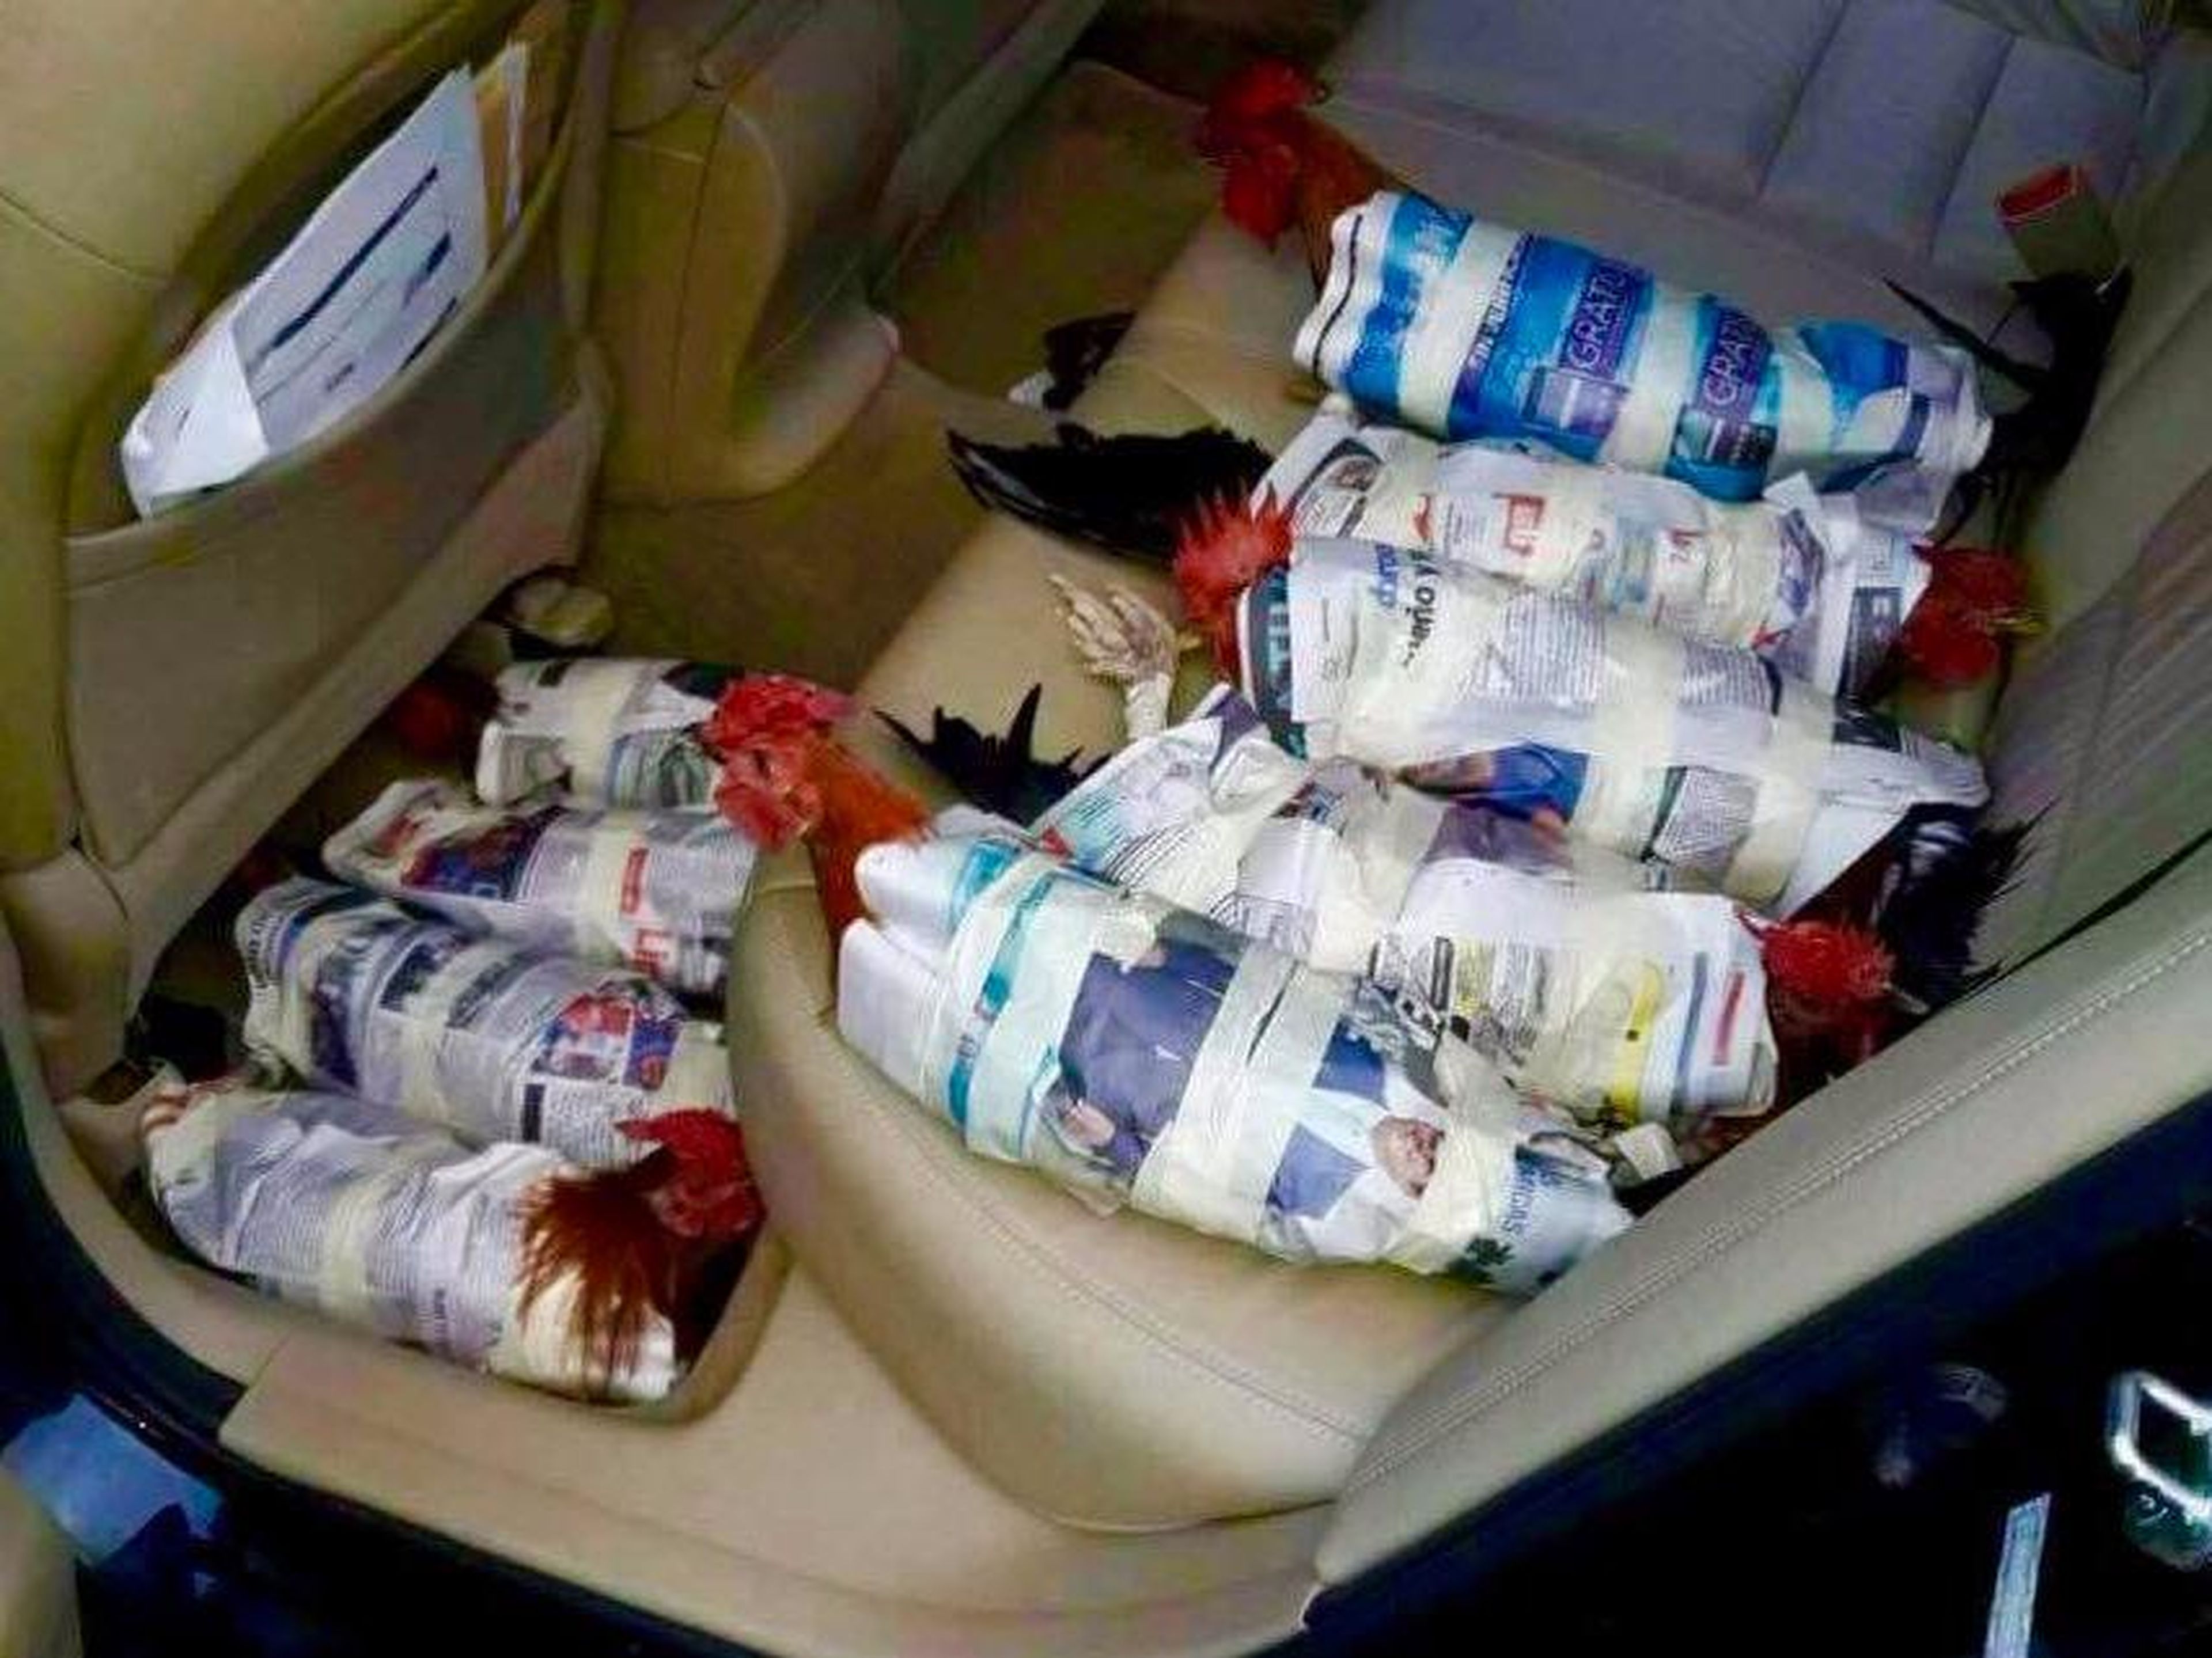 The chickens were wrapped in newspaper while being evacuated.